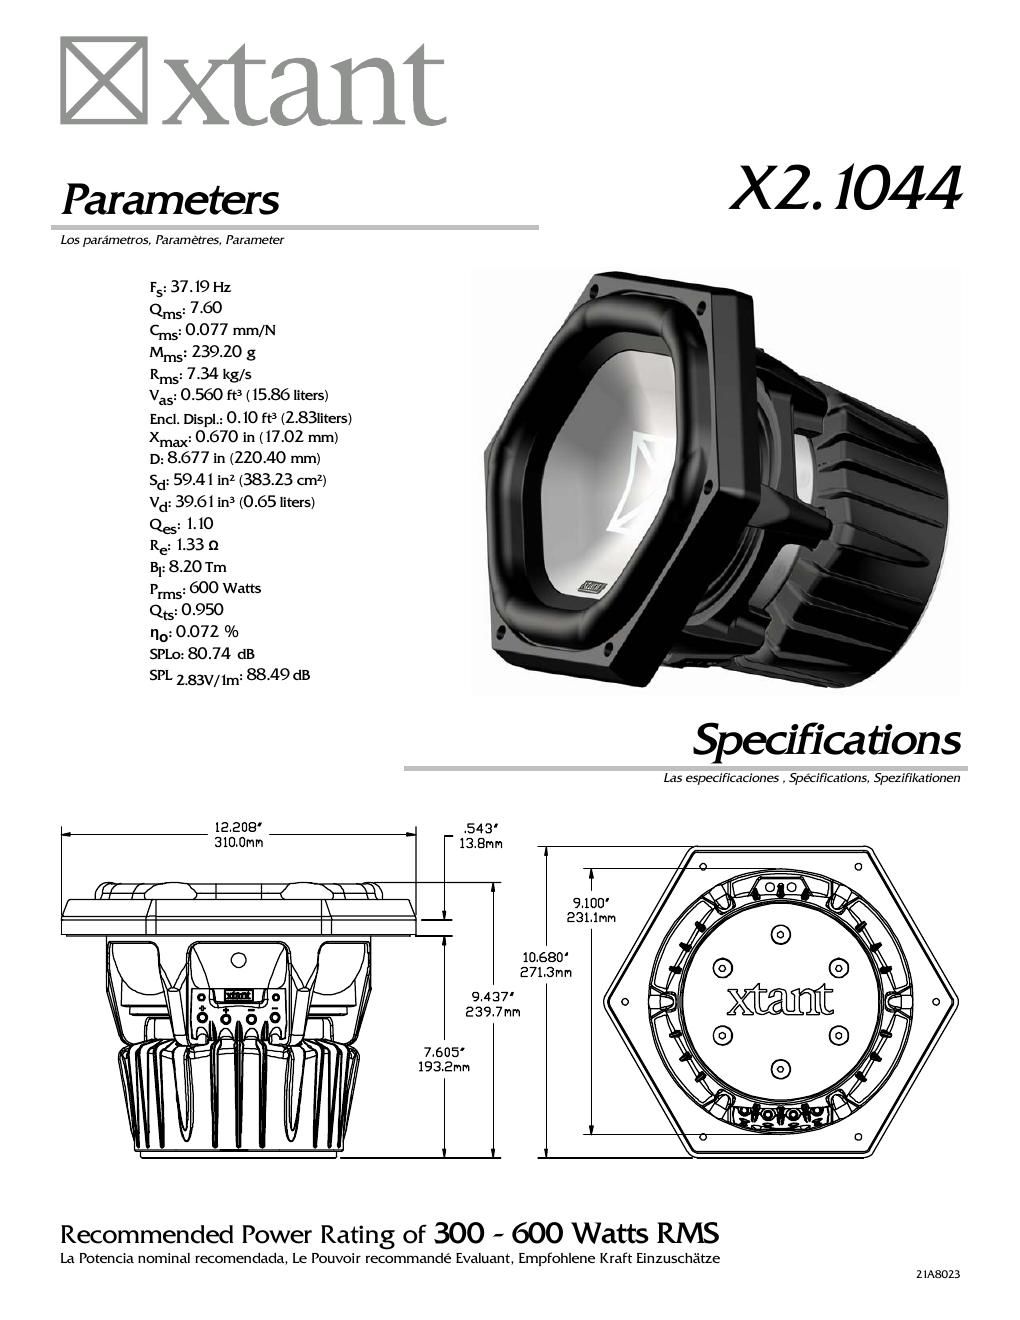 xtant x 2 1044 owners manual